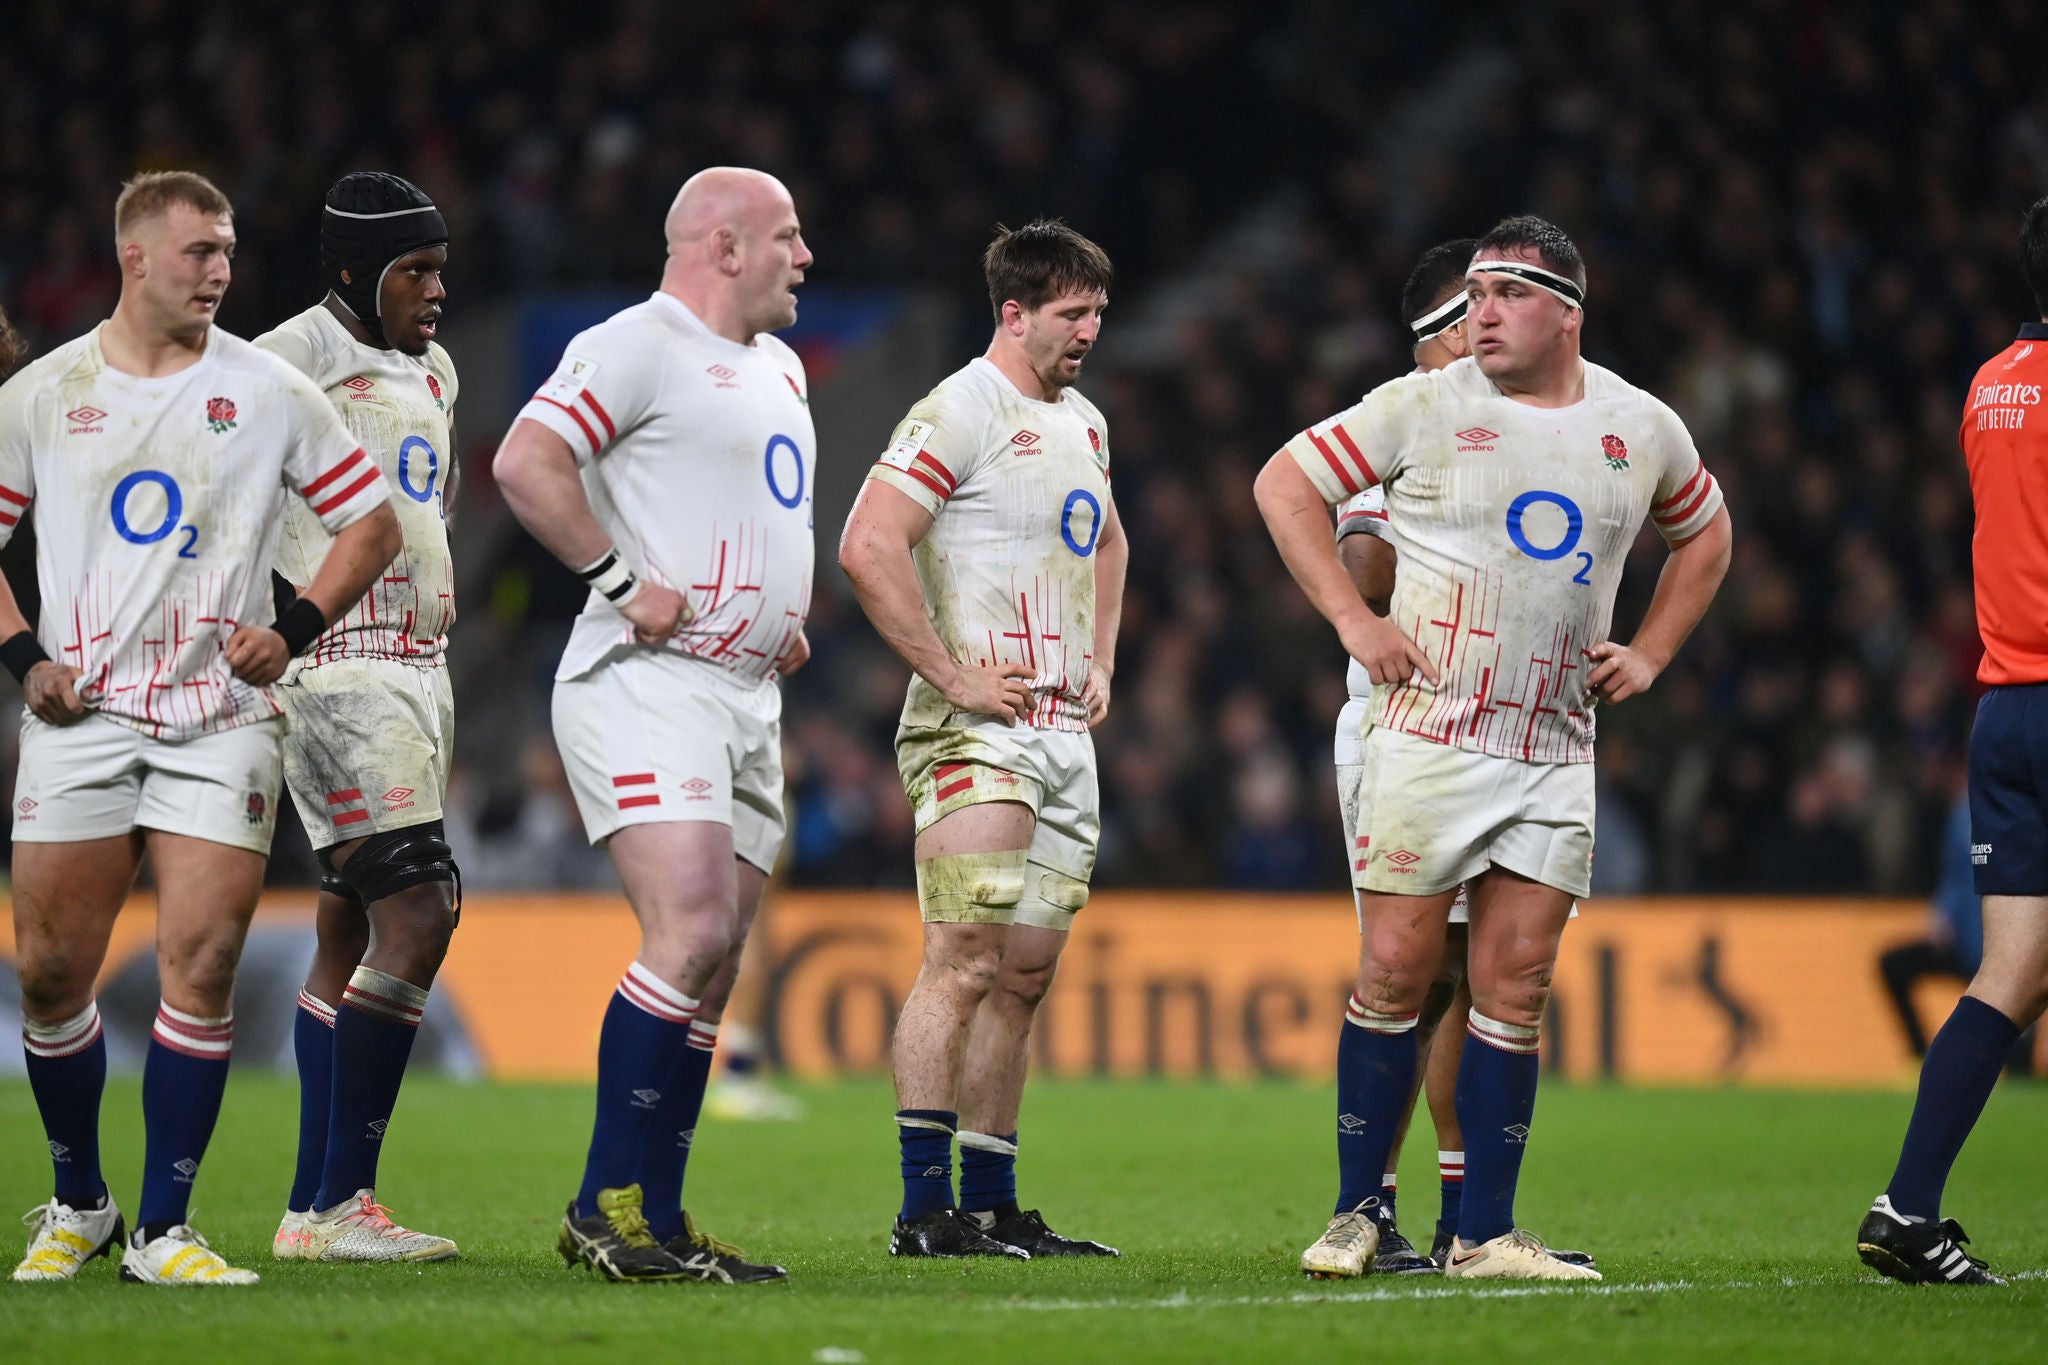 LONDON, ENGLAND - MARCH 11: Continental  during the Guinness Six Nations Rugby match between England and France at Twickenham Stadium on March 11, 2023 in London, England. (Photo by Dan Mullan - RFU/The RFU Collection via Getty Images)